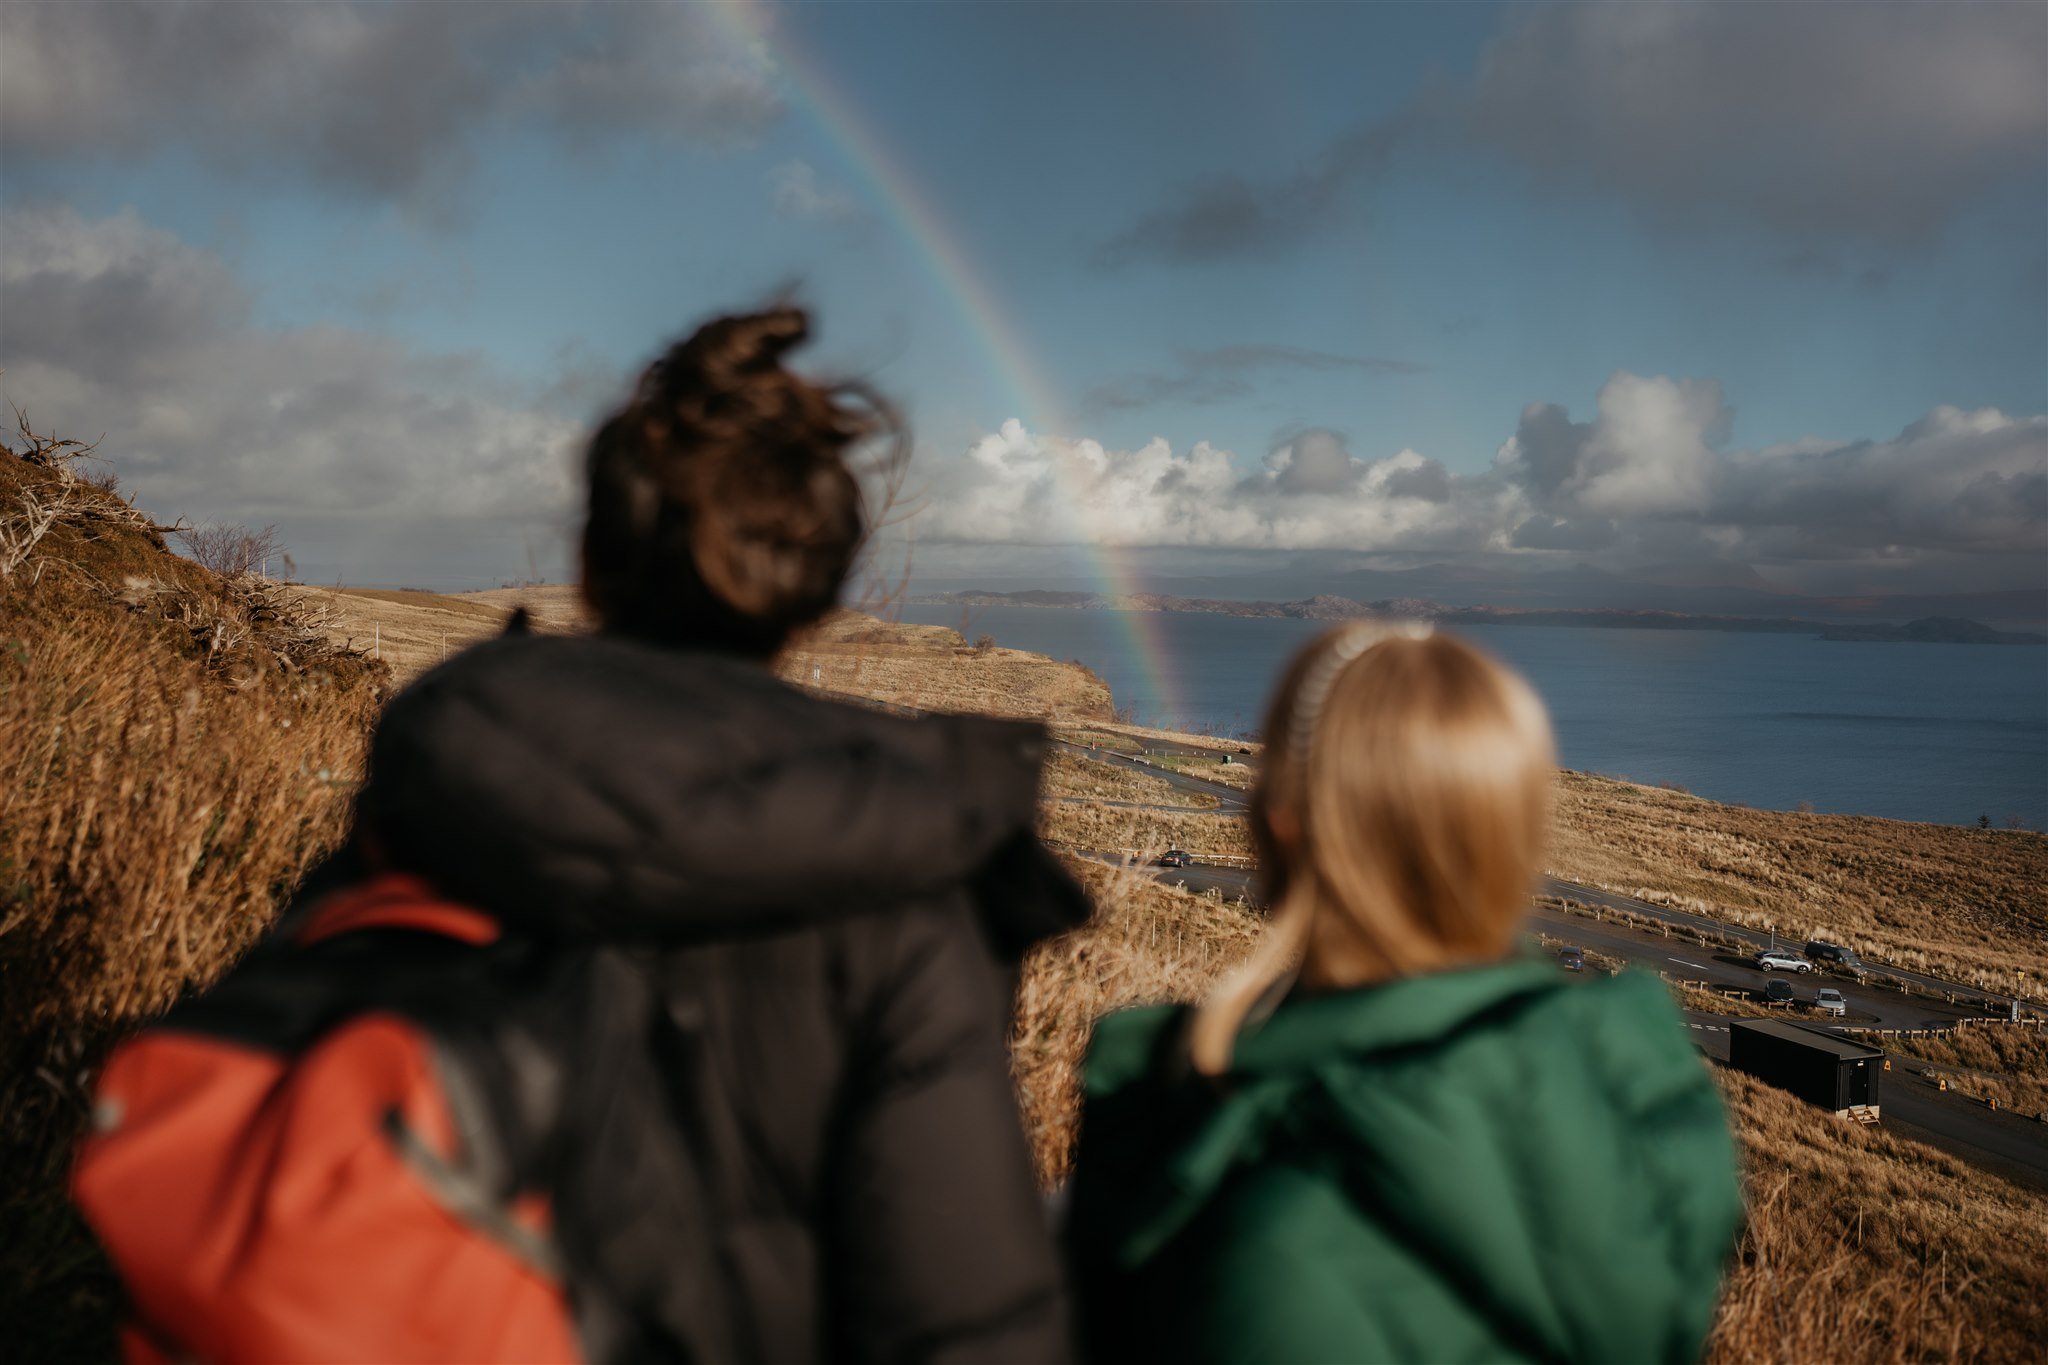 Brides look at the rainbow in the sky while hiking to their Isle of Skye elopement ceremony